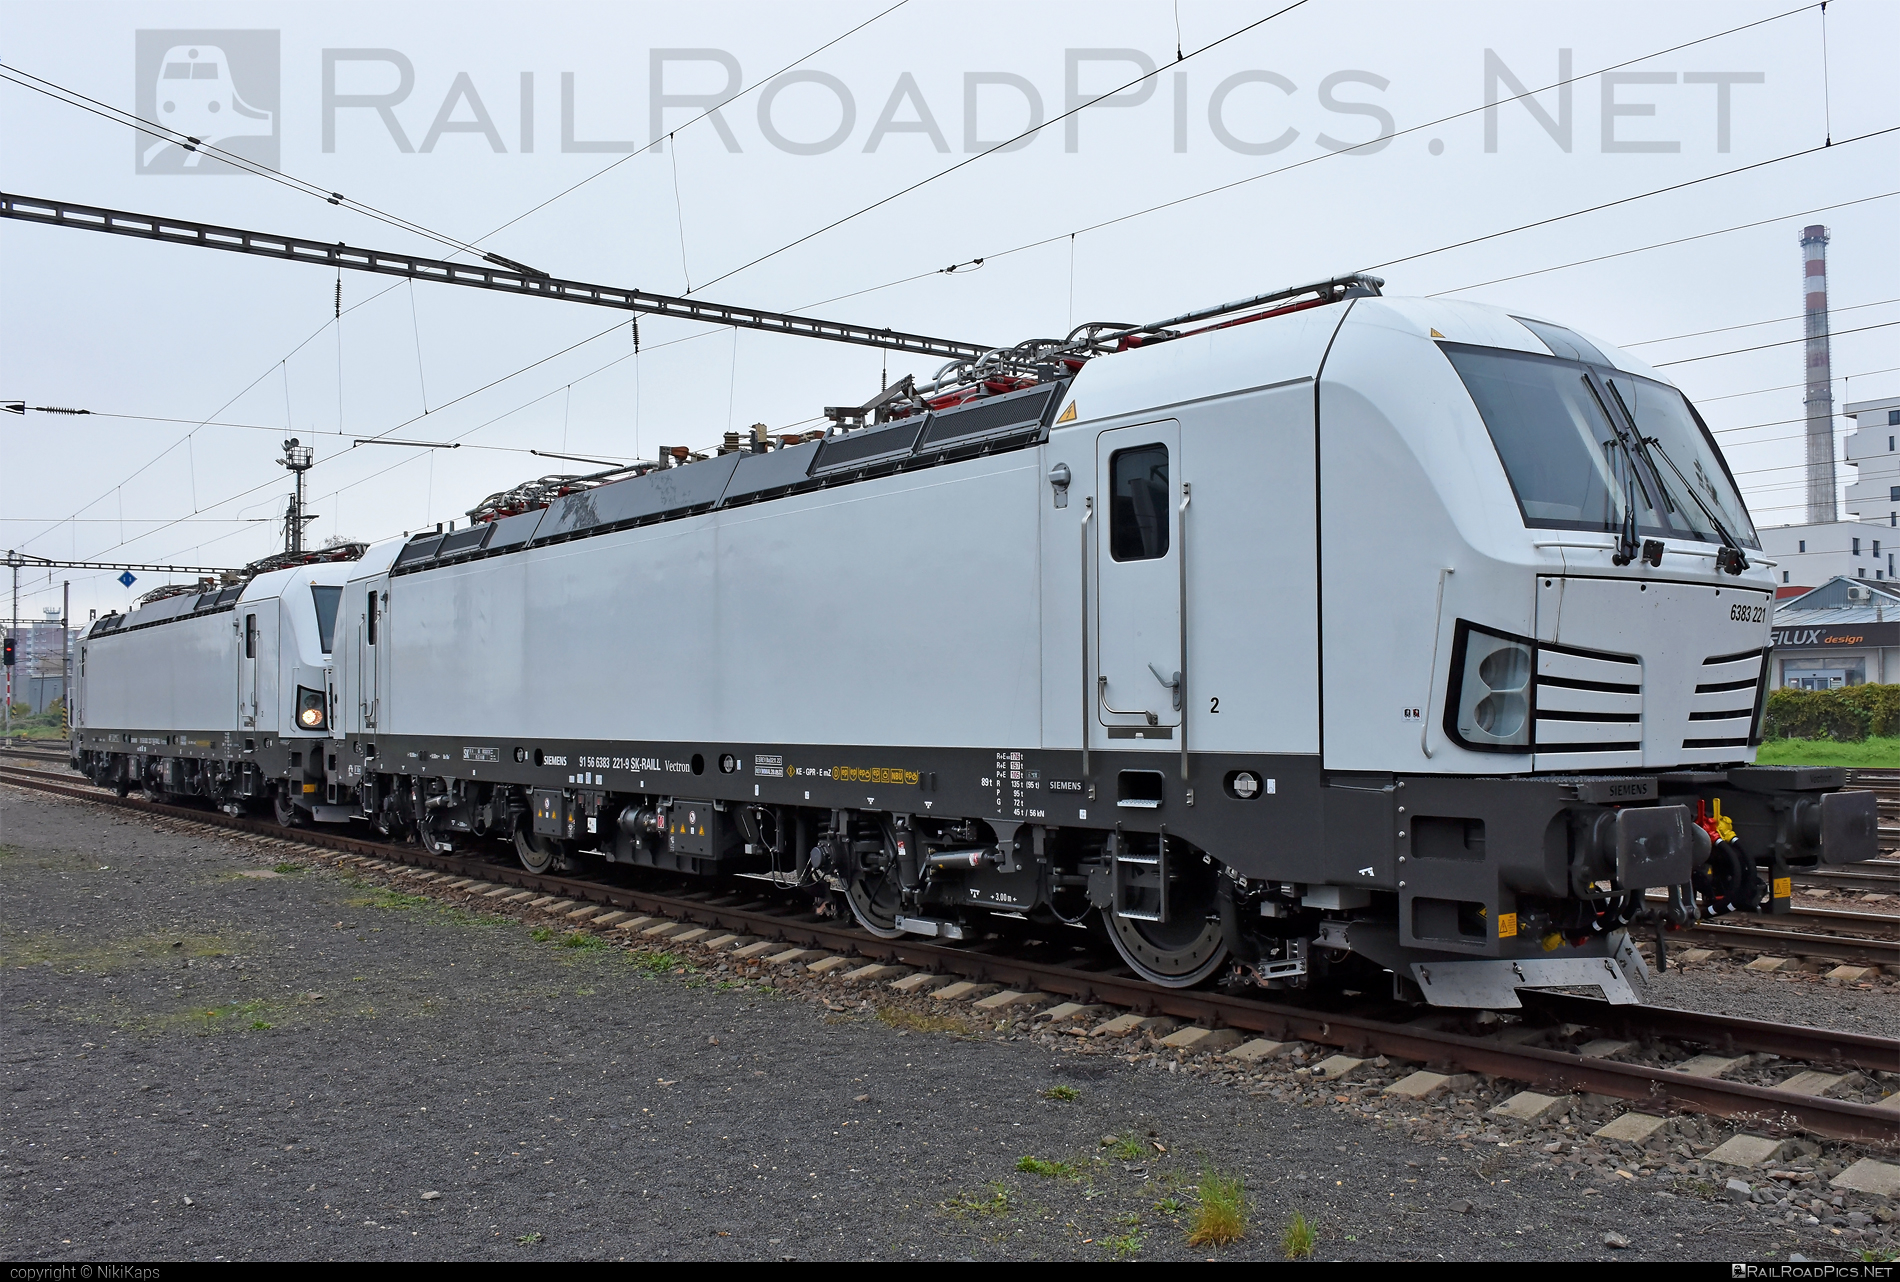 Siemens Vectron MS - 6383 221 operated by LOKORAIL, a.s. #RollingStockLease #RollingStockLeaseSro #budamar #lokorail #lrl #raill #siemens #siemensVectron #siemensVectronMS #vectron #vectronMS